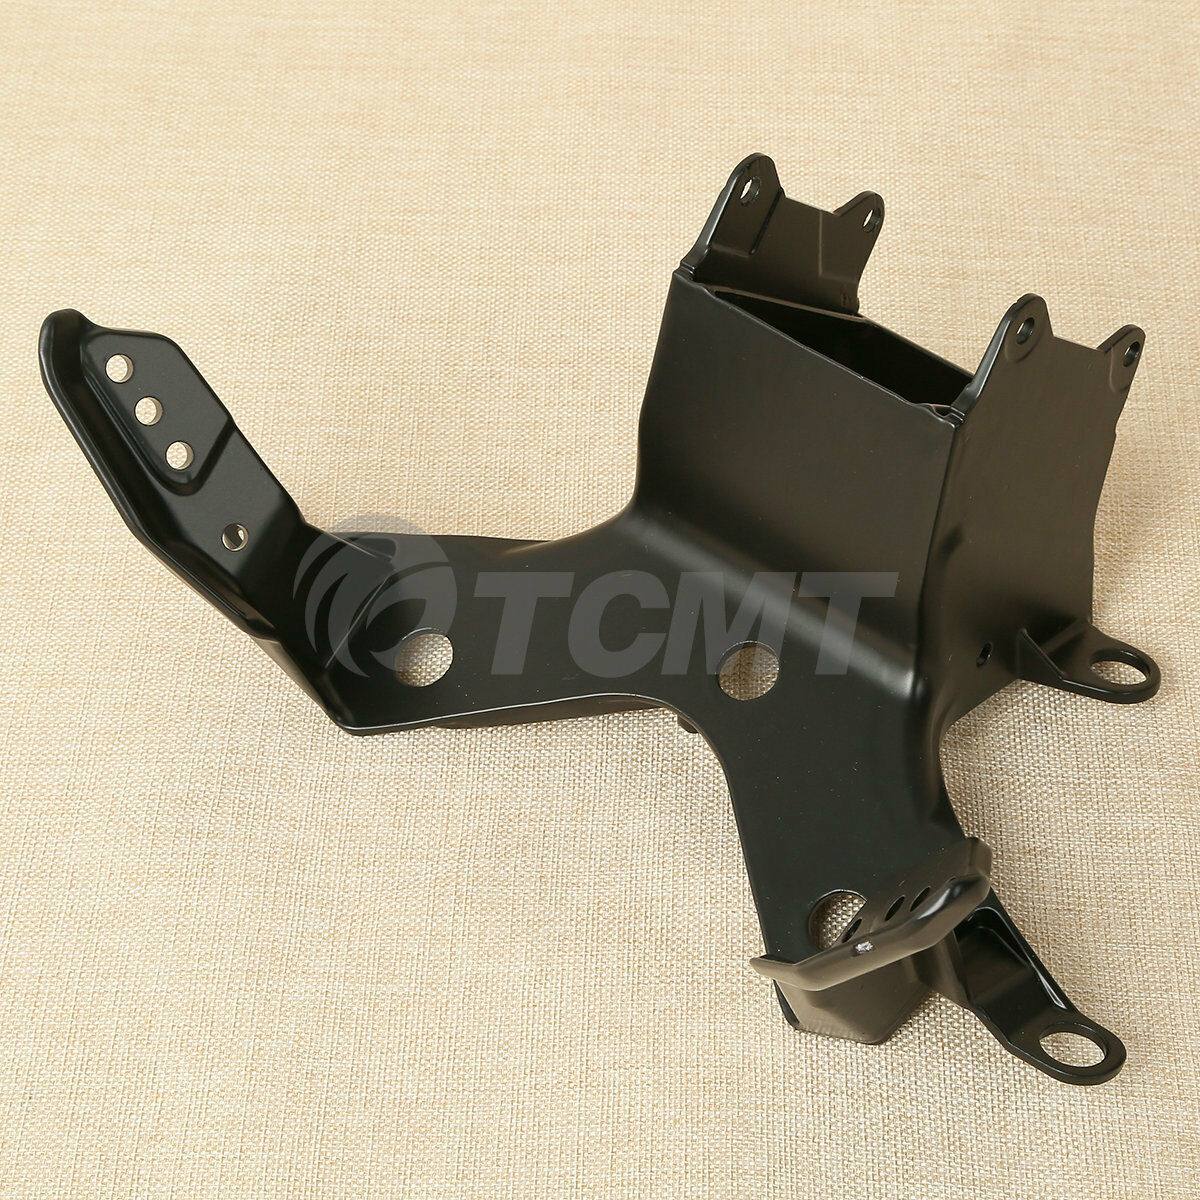 Upper Fairing Stay Bracket For YAMAHA YZF R6 YZFR6 2008-2016 10 11 12 13 14 15 - Moto Life Products